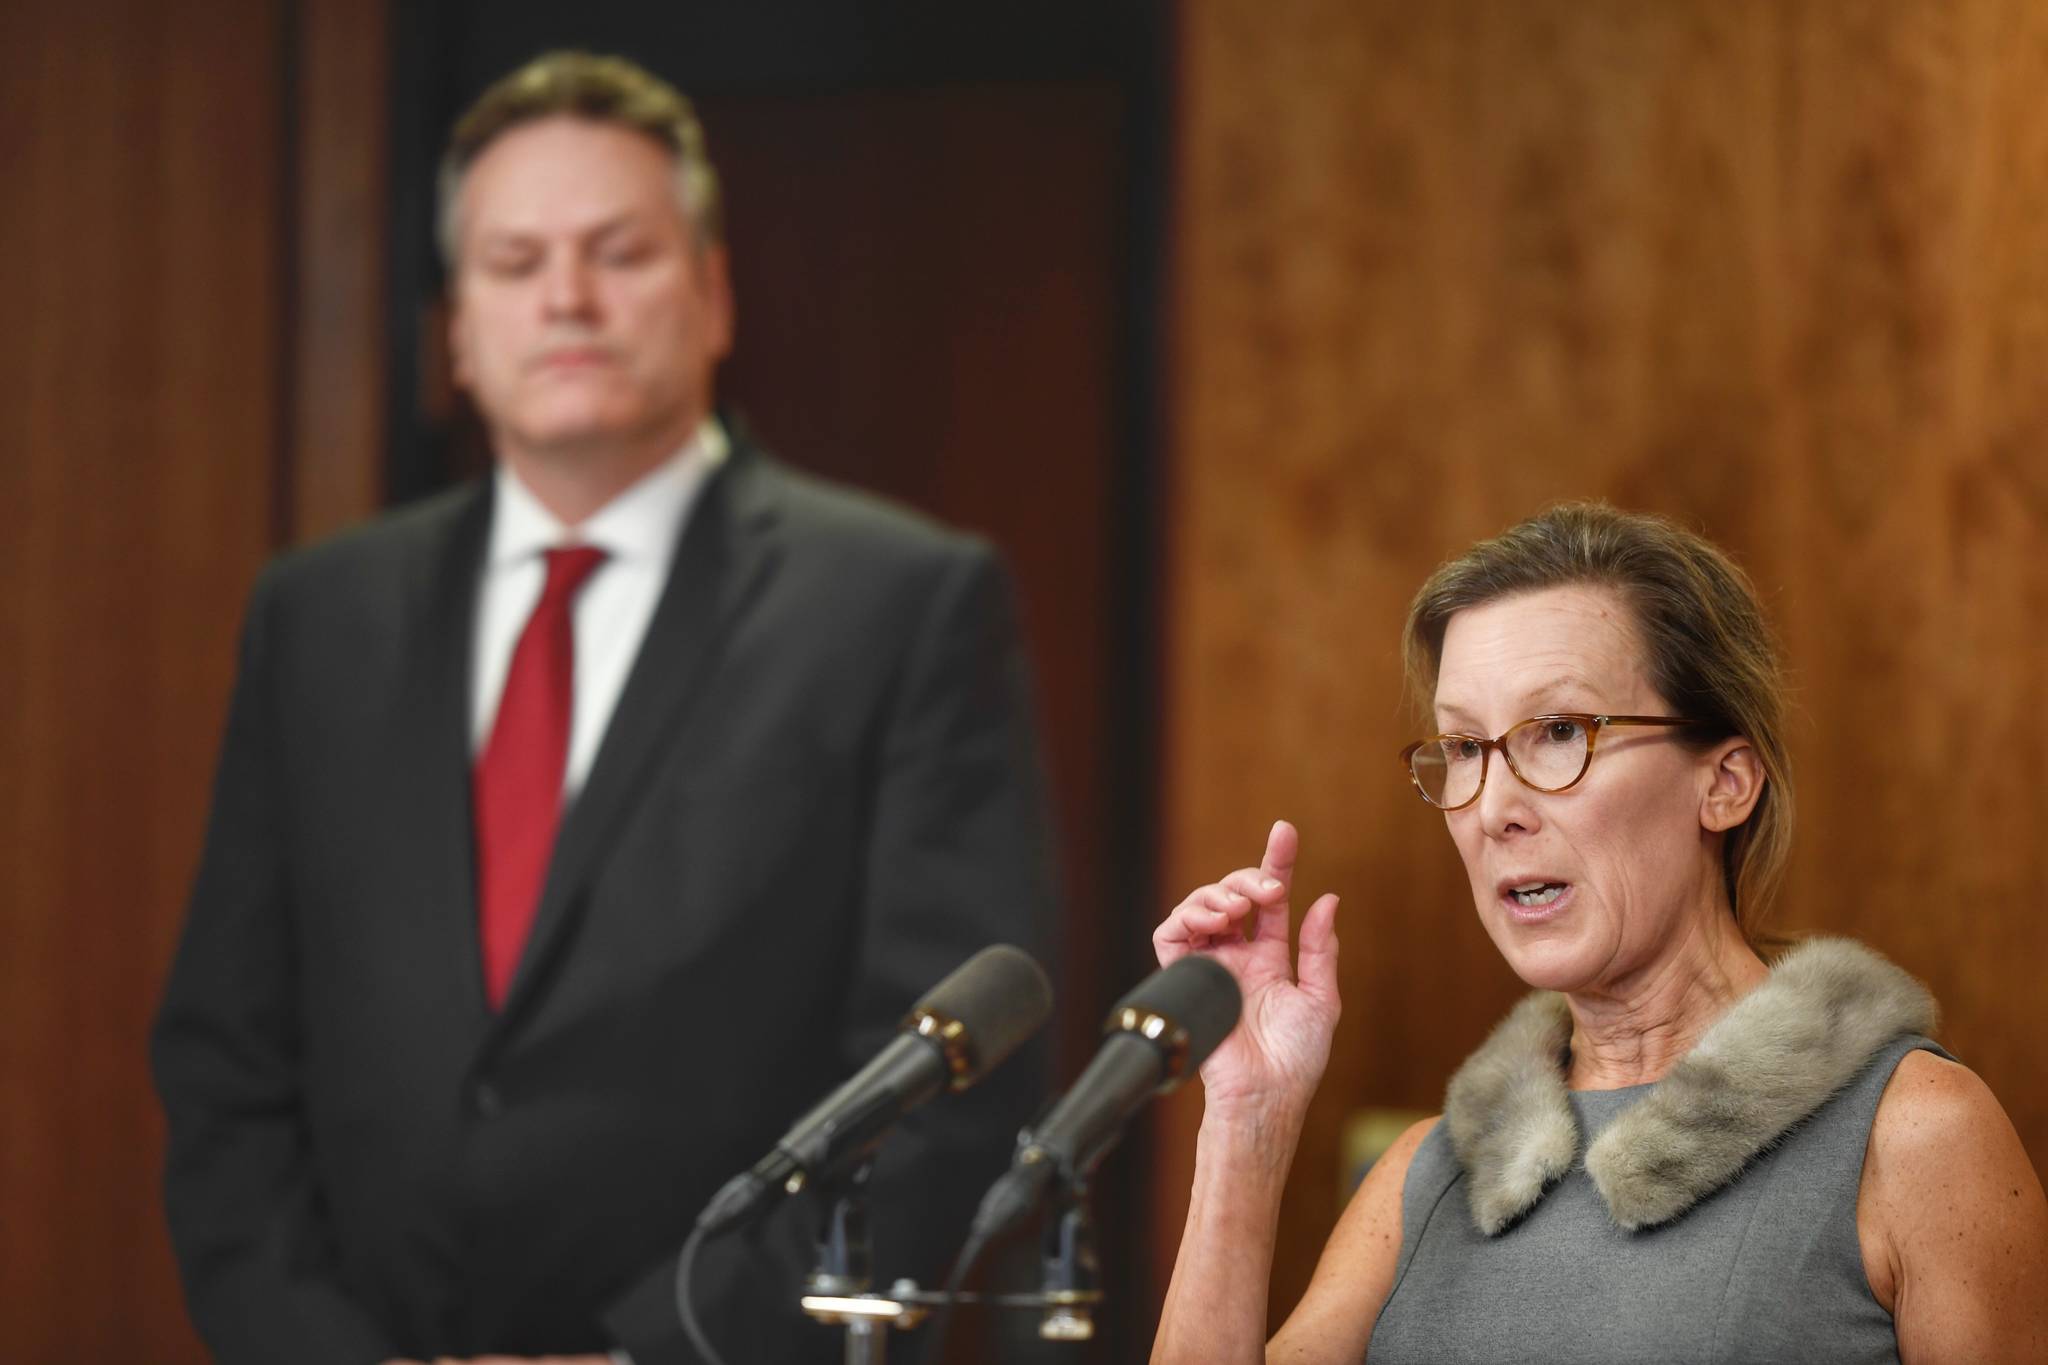 OMB Director Donna Arduin explains the budget as Gov. Mike Dunleavy listens during a press conference to announce the state’s budget on Wednesday, Feb. 13, 2019. (Michael Penn | Juneau Empire)